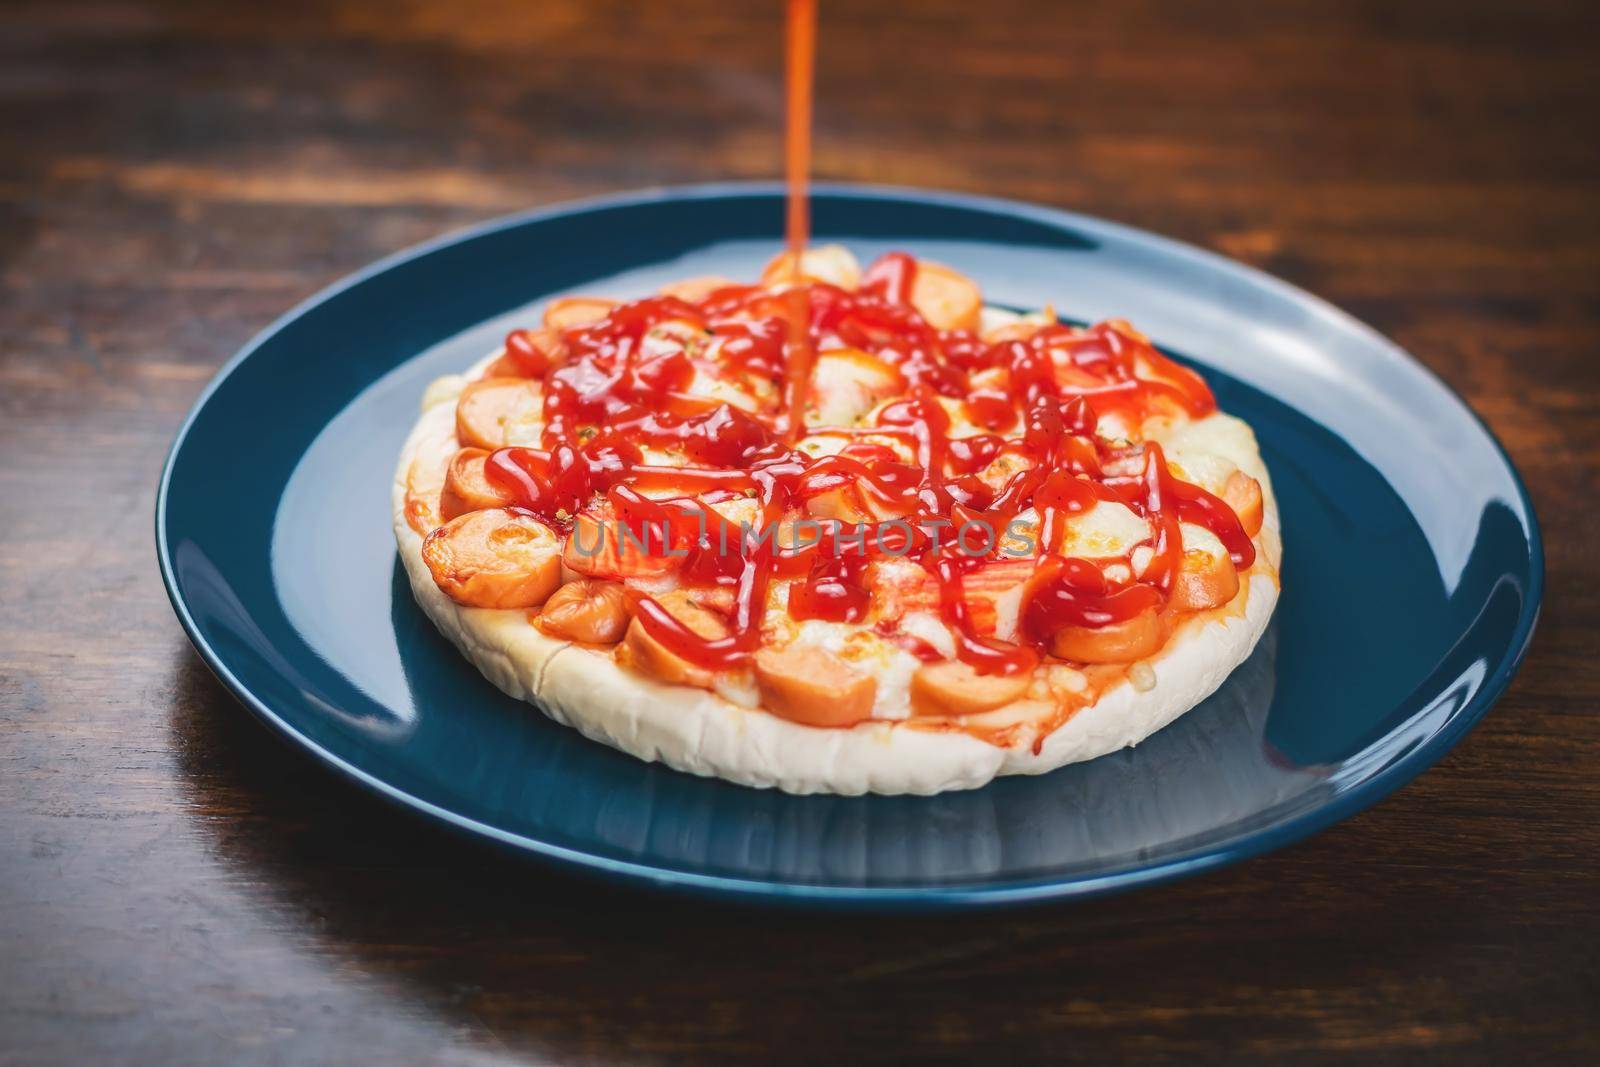 Put tomato sauce on the pizza, sausage and crab sticks in a ceramic plate on a wooden table.